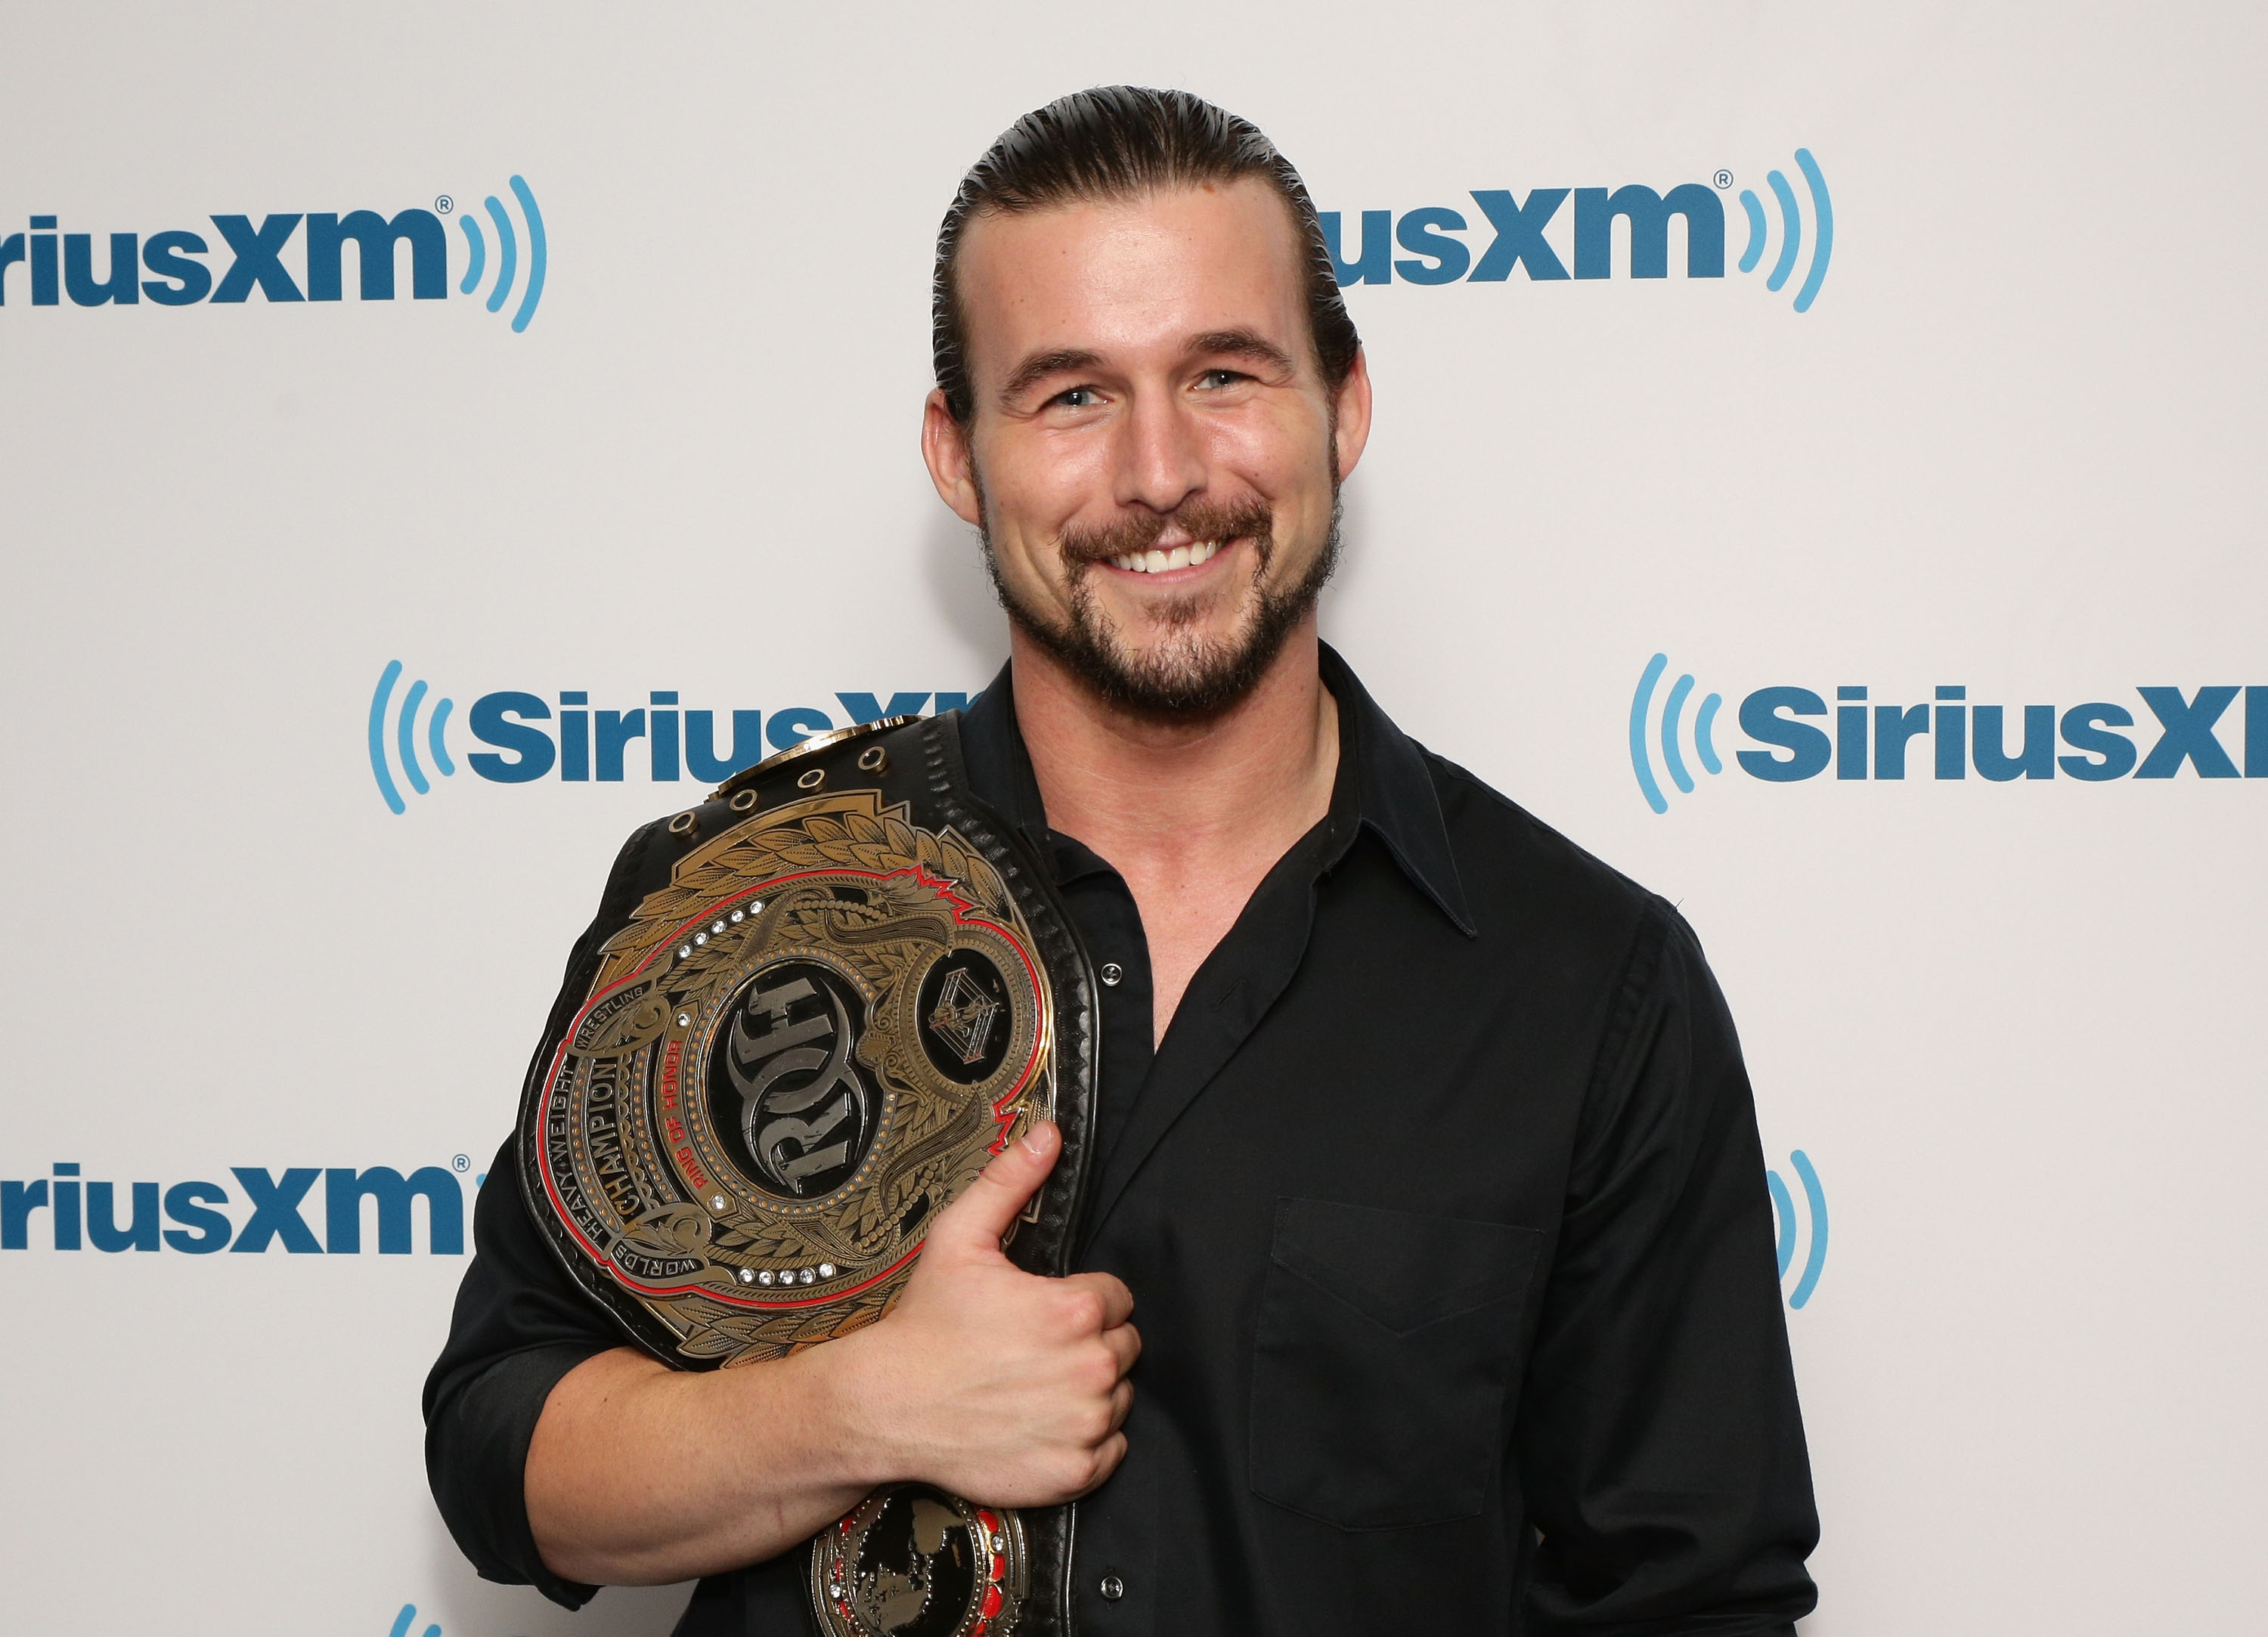 NEW YORK, NY - MAY 15: Wrestler Adam Cole from Ring Of Honor visits SiriusXM Studios on May 15, 2014 in New York City. (Photo by Andrew Toth/Getty Images)